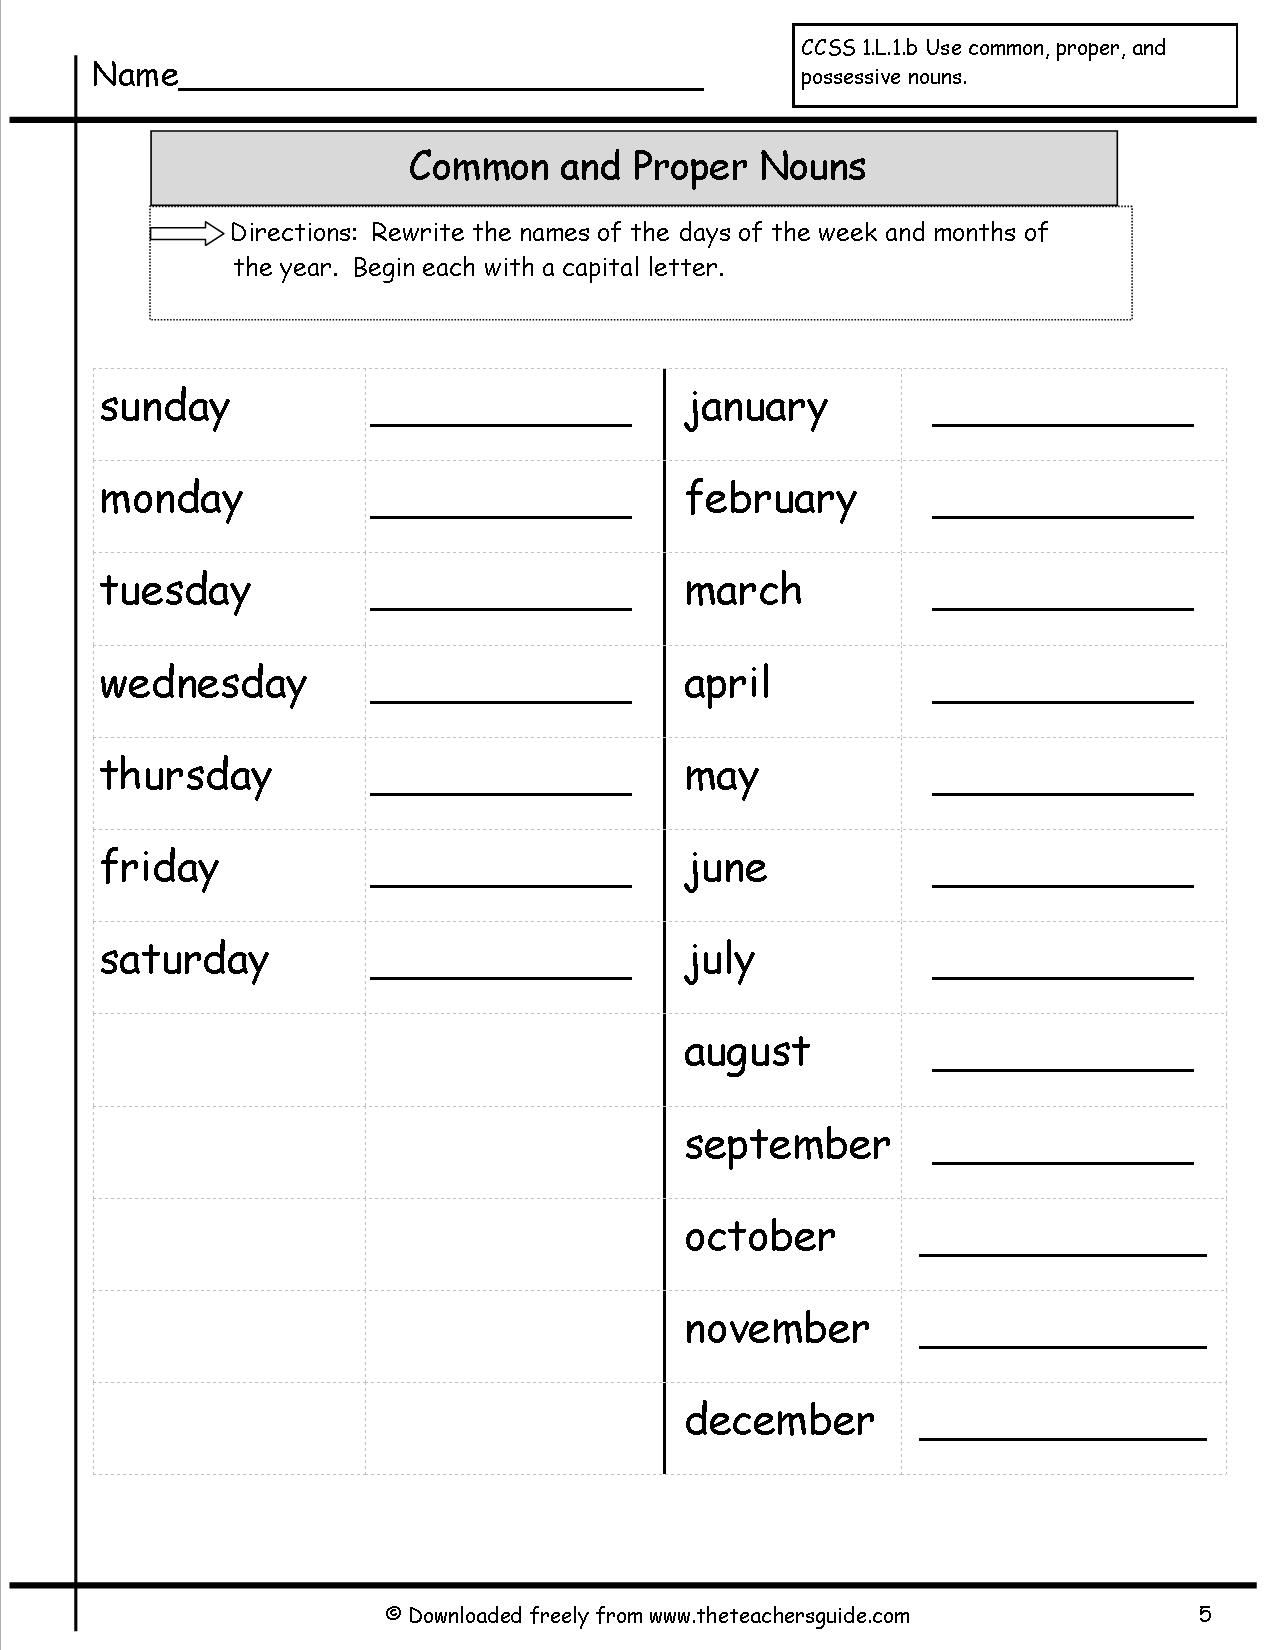 4th-grade-common-and-proper-nouns-worksheets-for-grade-4-with-answers-askworksheet